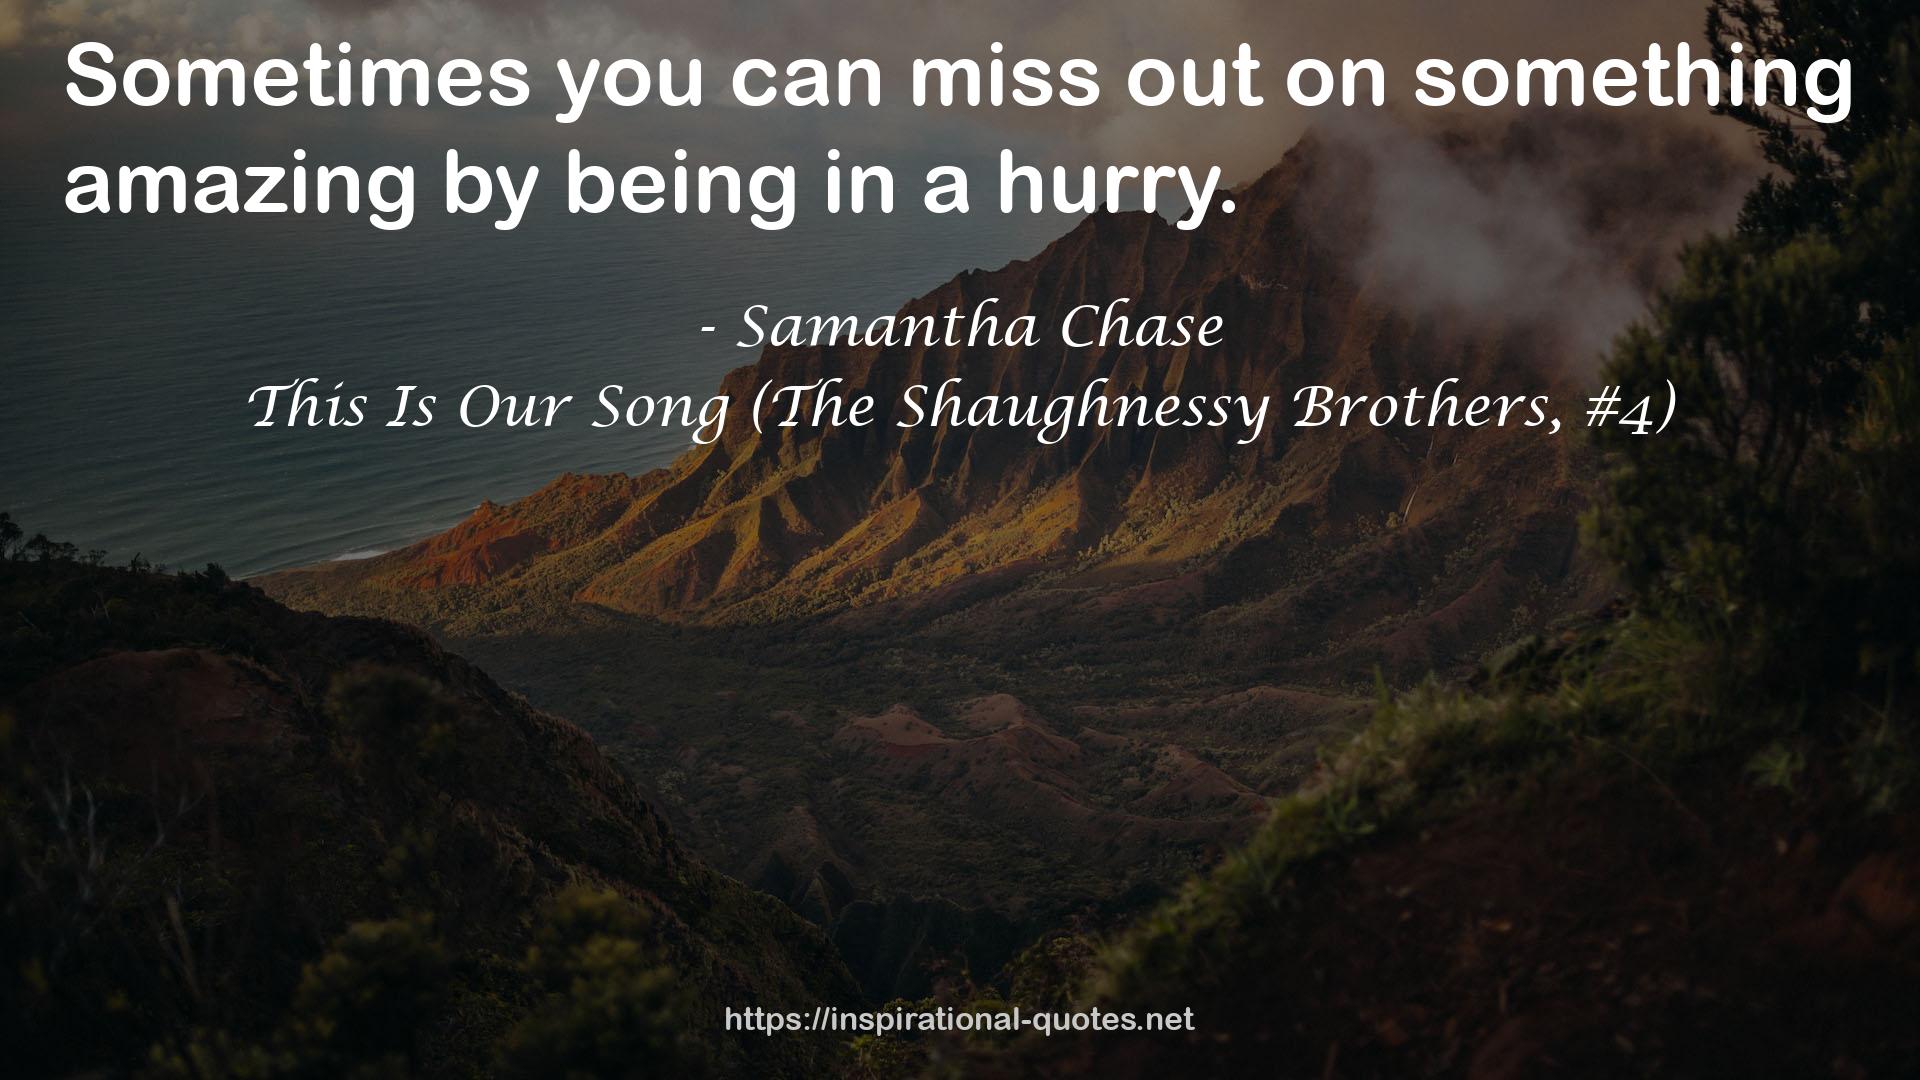 This Is Our Song (The Shaughnessy Brothers, #4) QUOTES